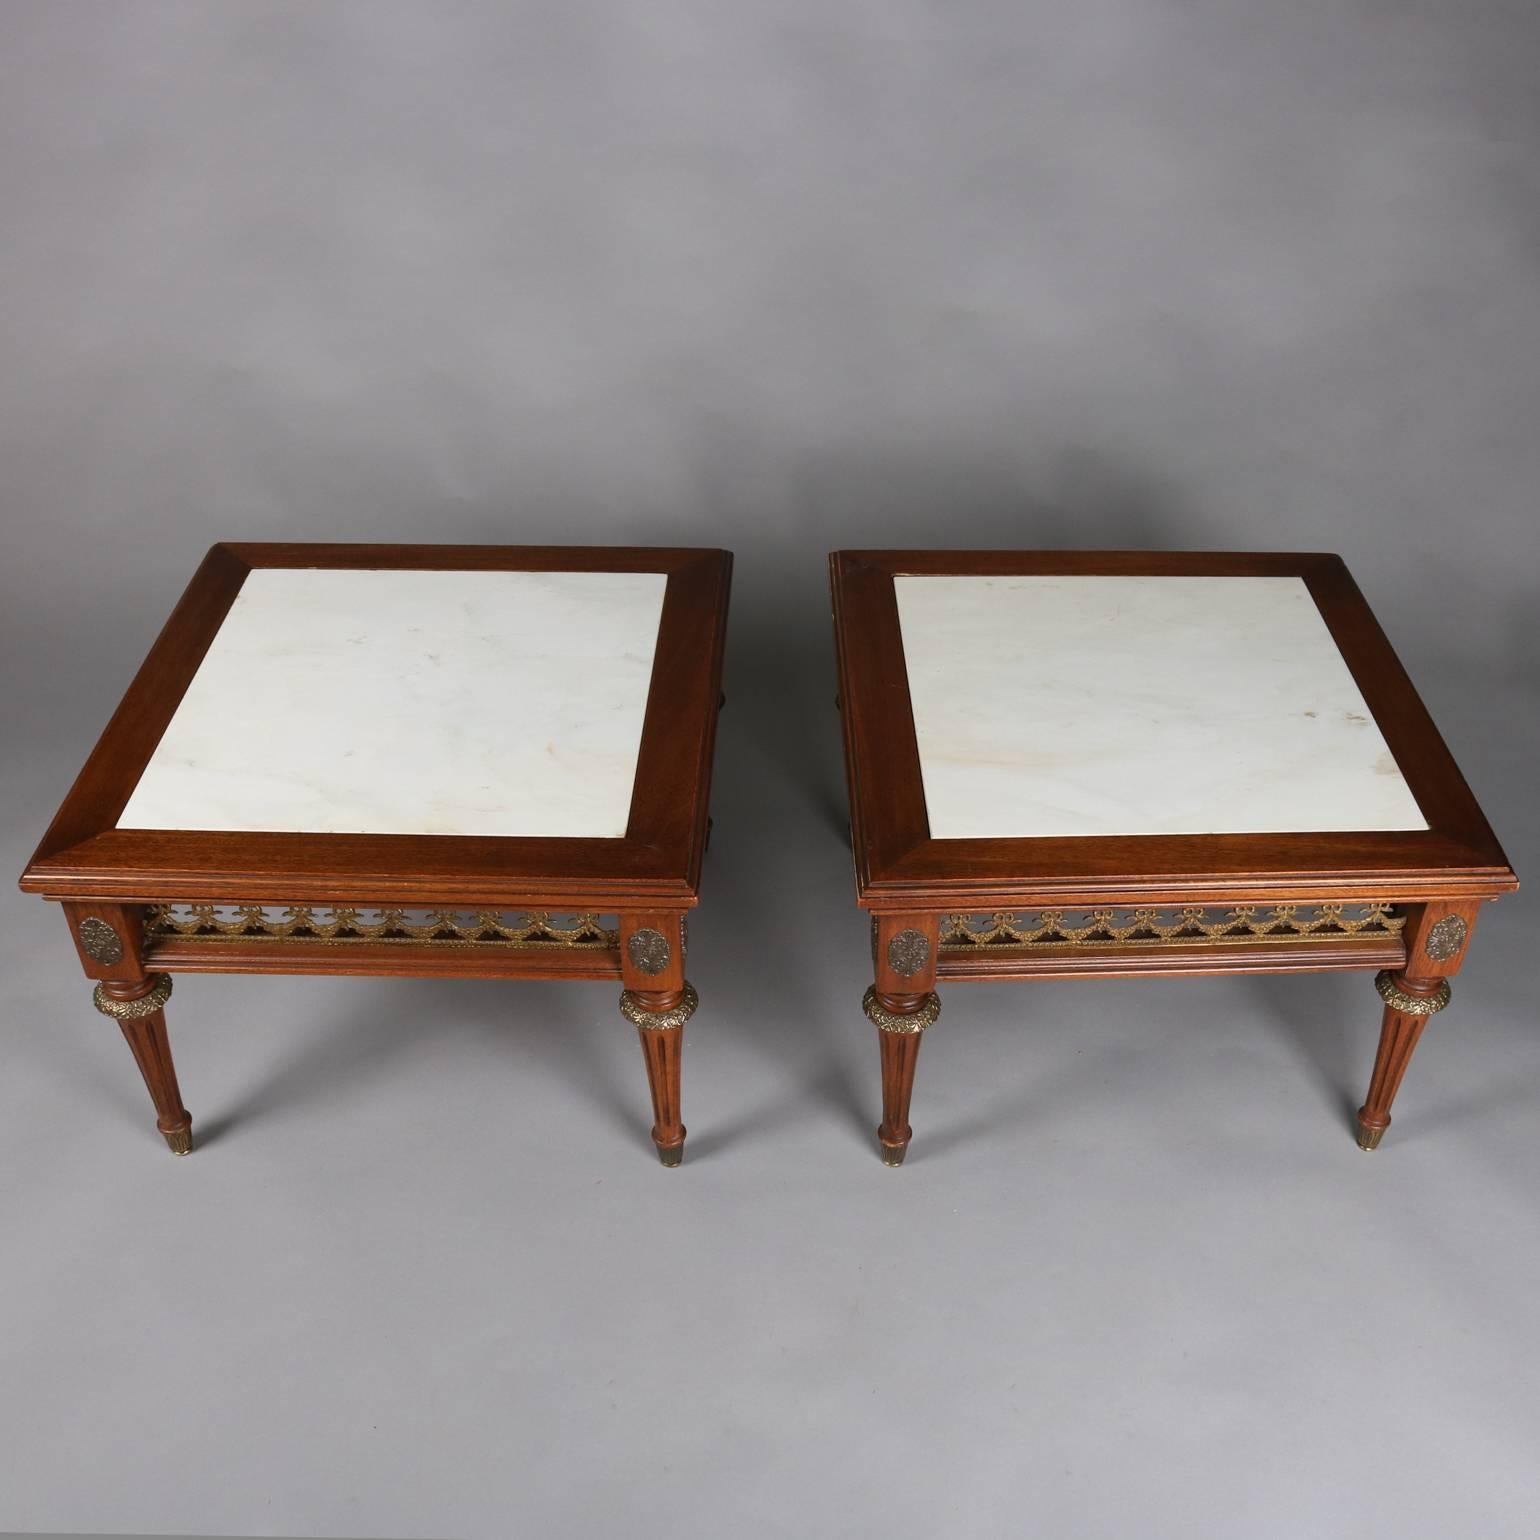 Pair of antique French Louis XVI style low table feature mahogany construction with cast garland form pierced apron, foliate cast bronze accoutrements, and inset marble tops, 19th century

Matching pair of end stands listed separately

Measure -